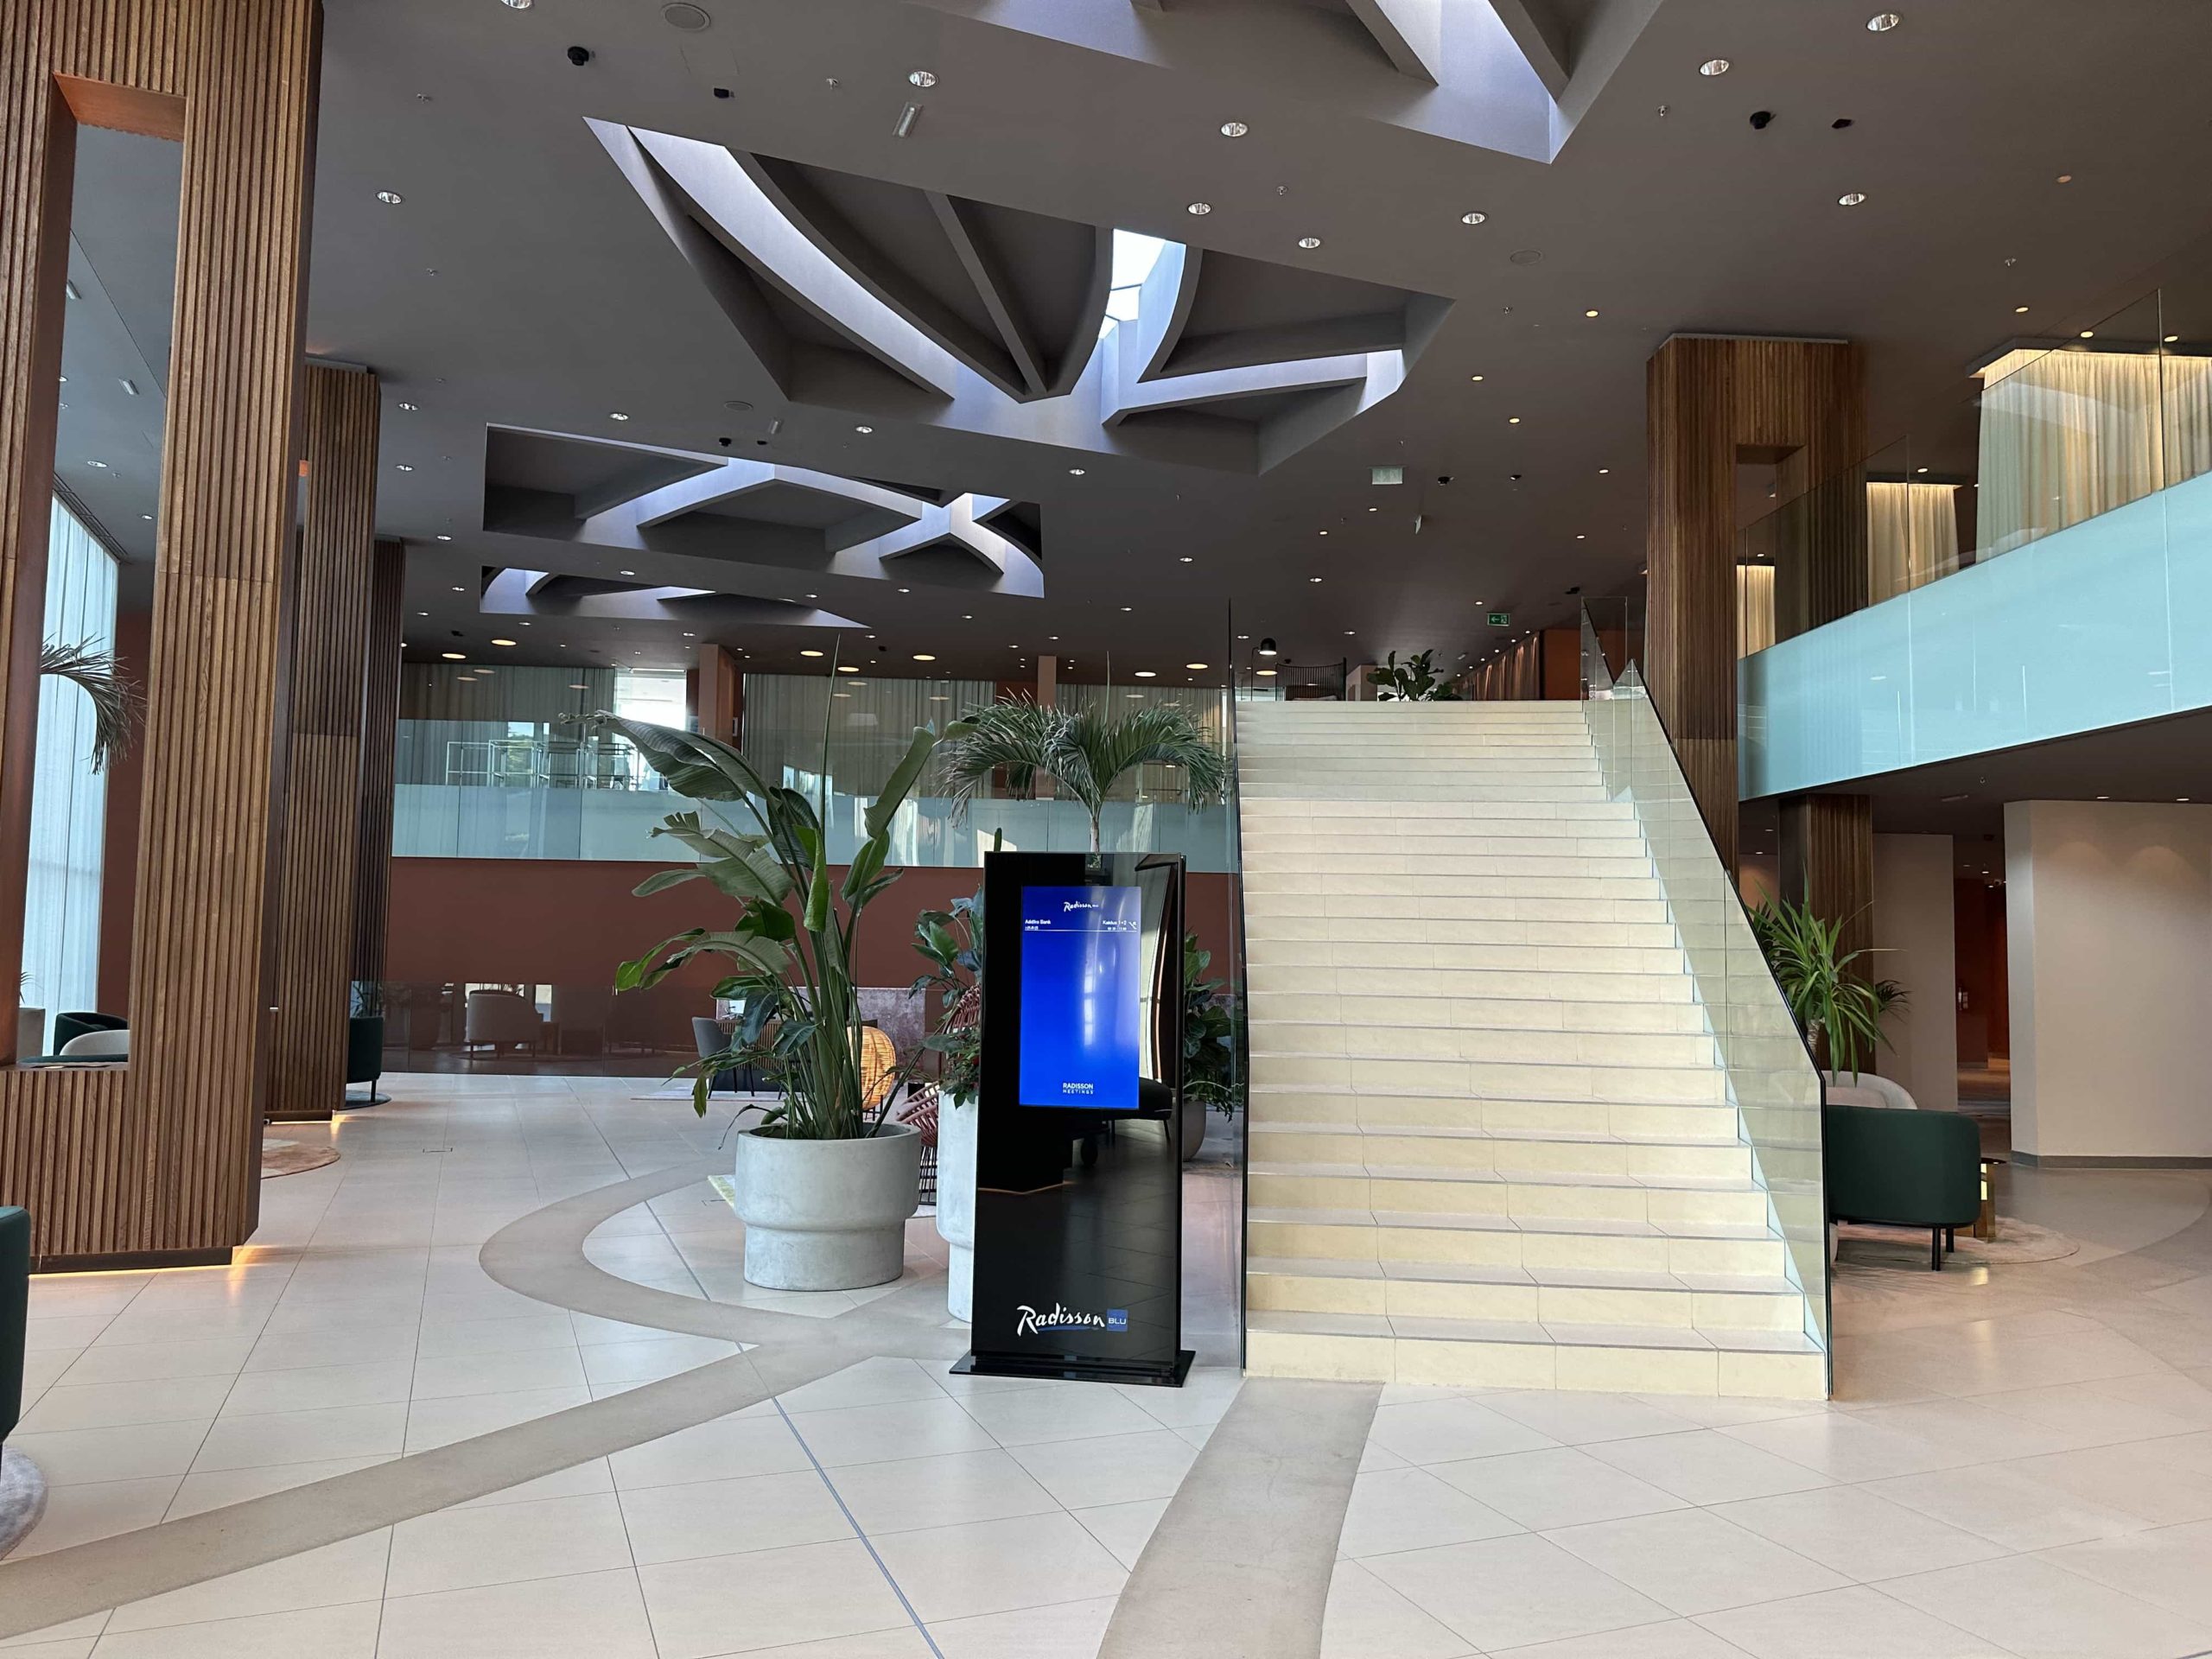 The double-height lobby area in the Radisson Blu, Split hotel